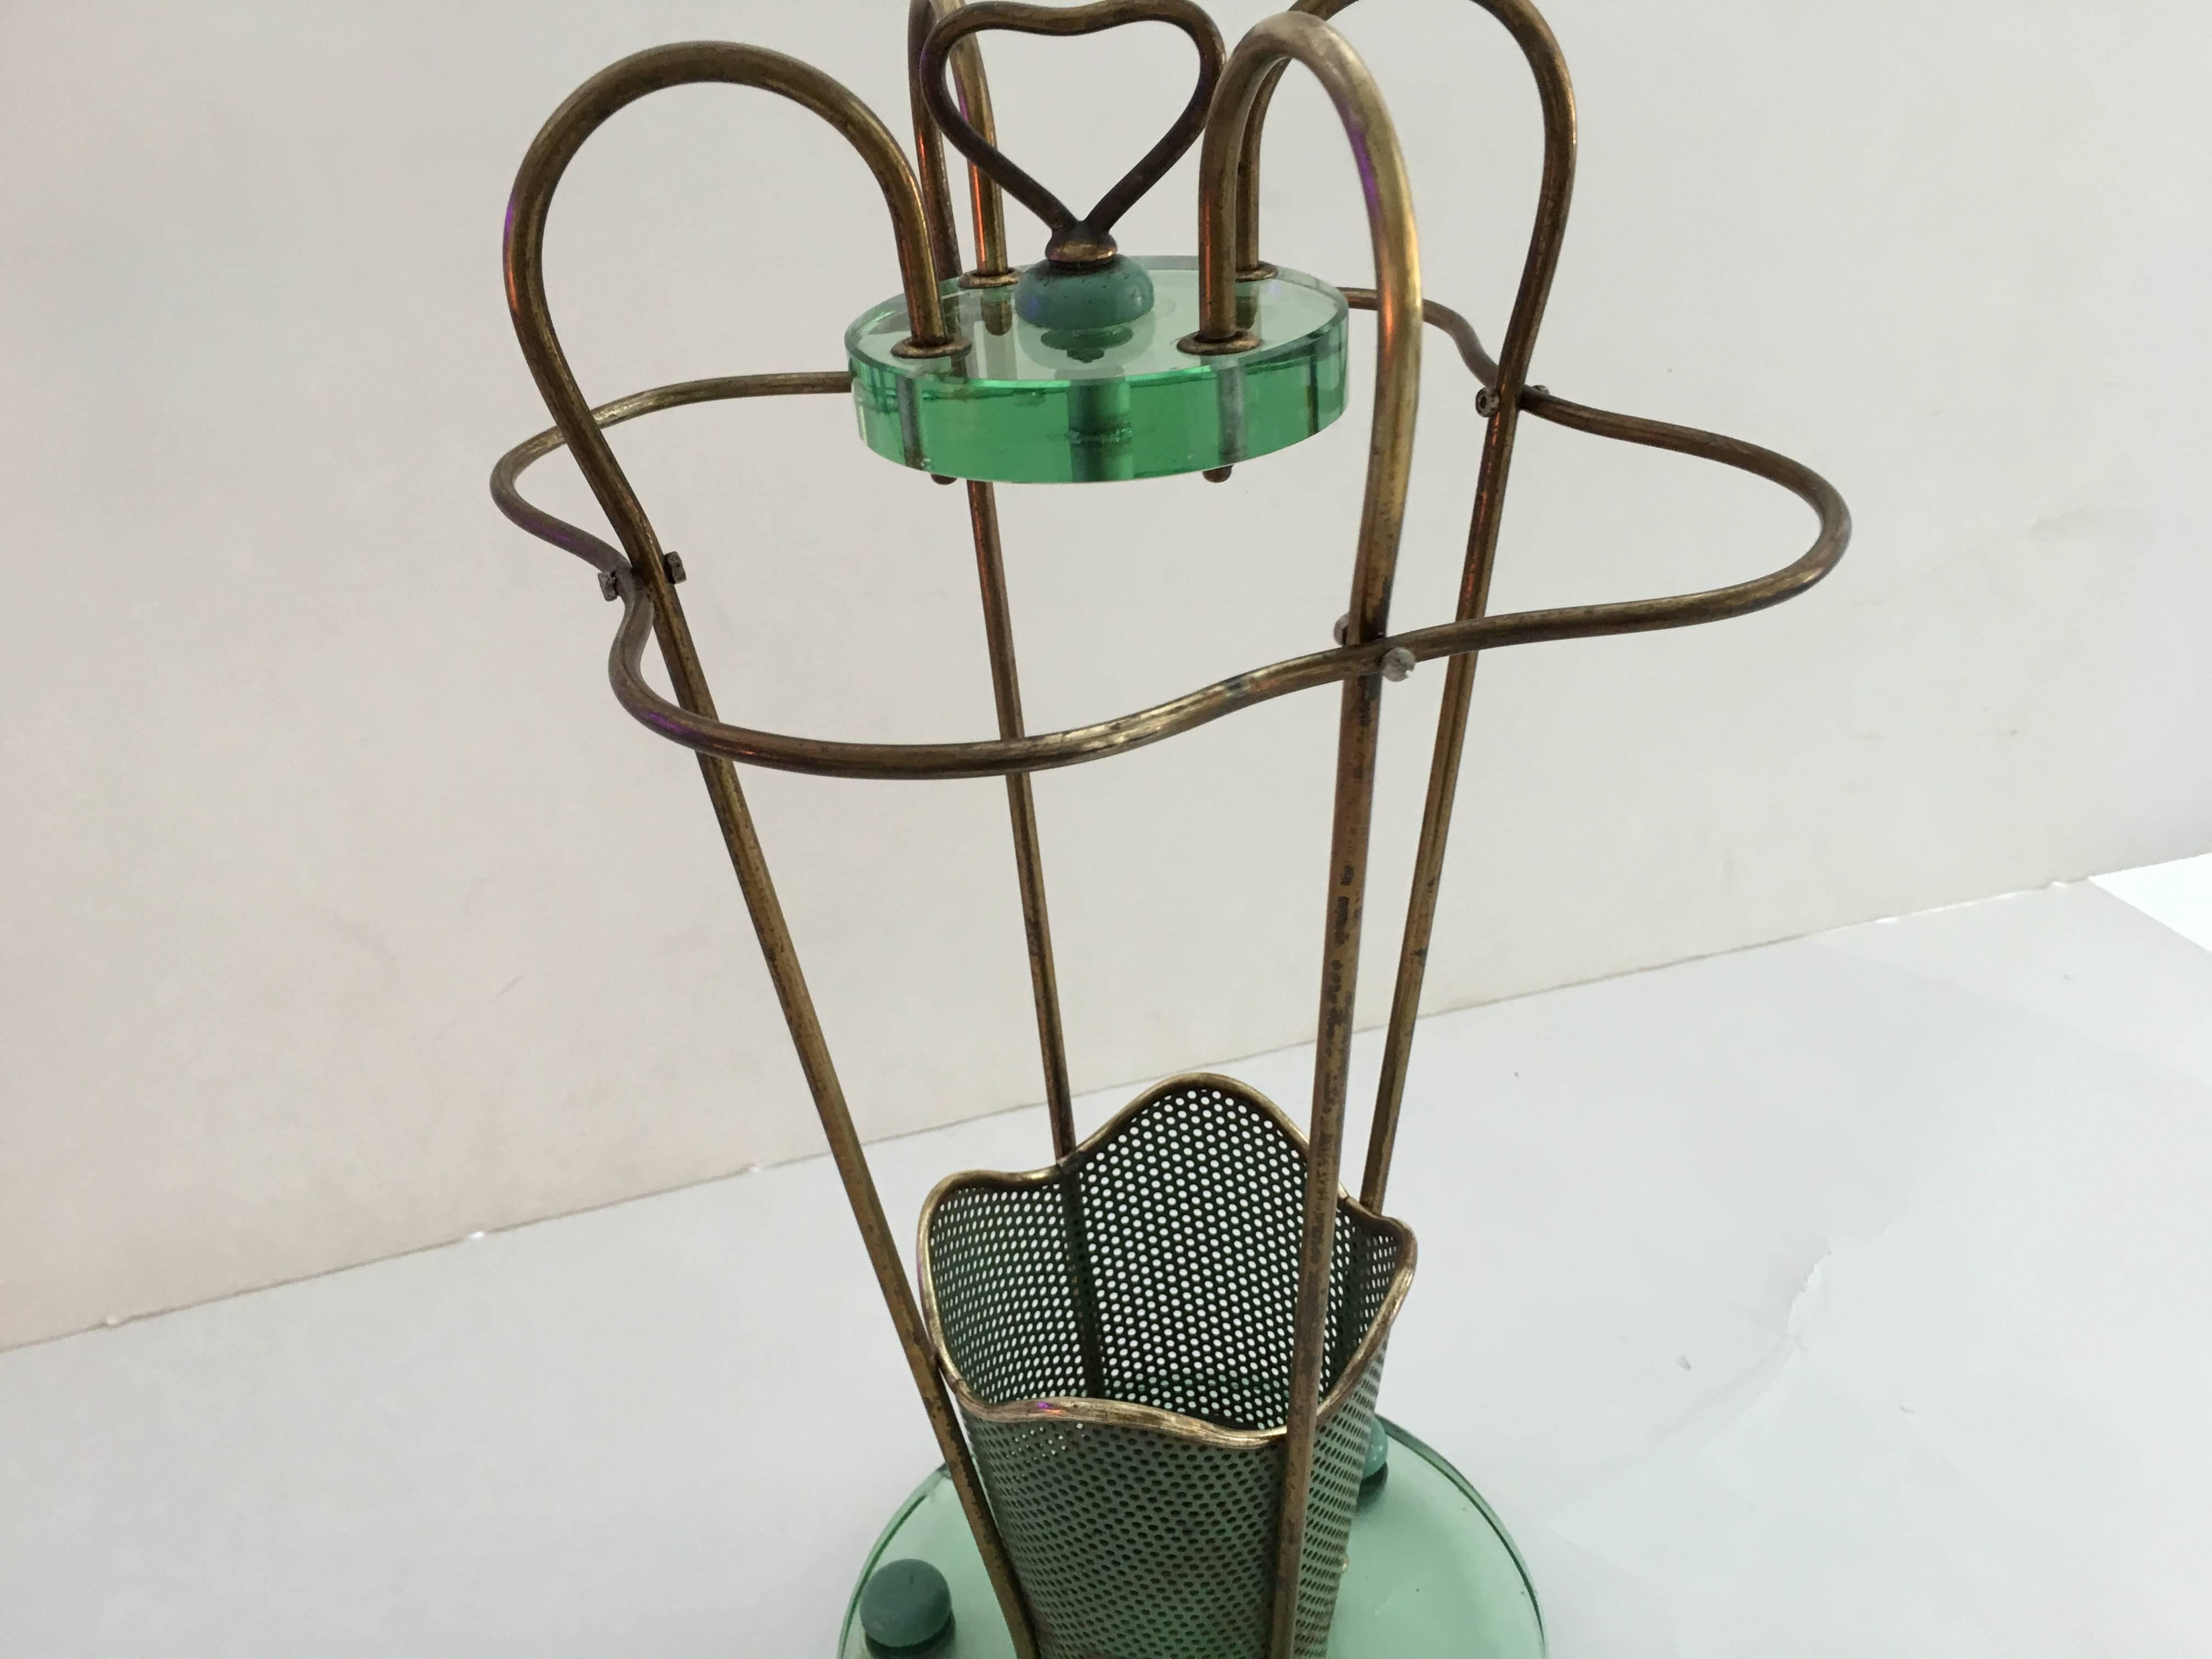 Very rare and exquisite umbrella stand, 1950s. Metal and brass, the base is 1 inch thick glass and 10 inch diameter. Width at the top is 11 inches. Total height is 22 inches.